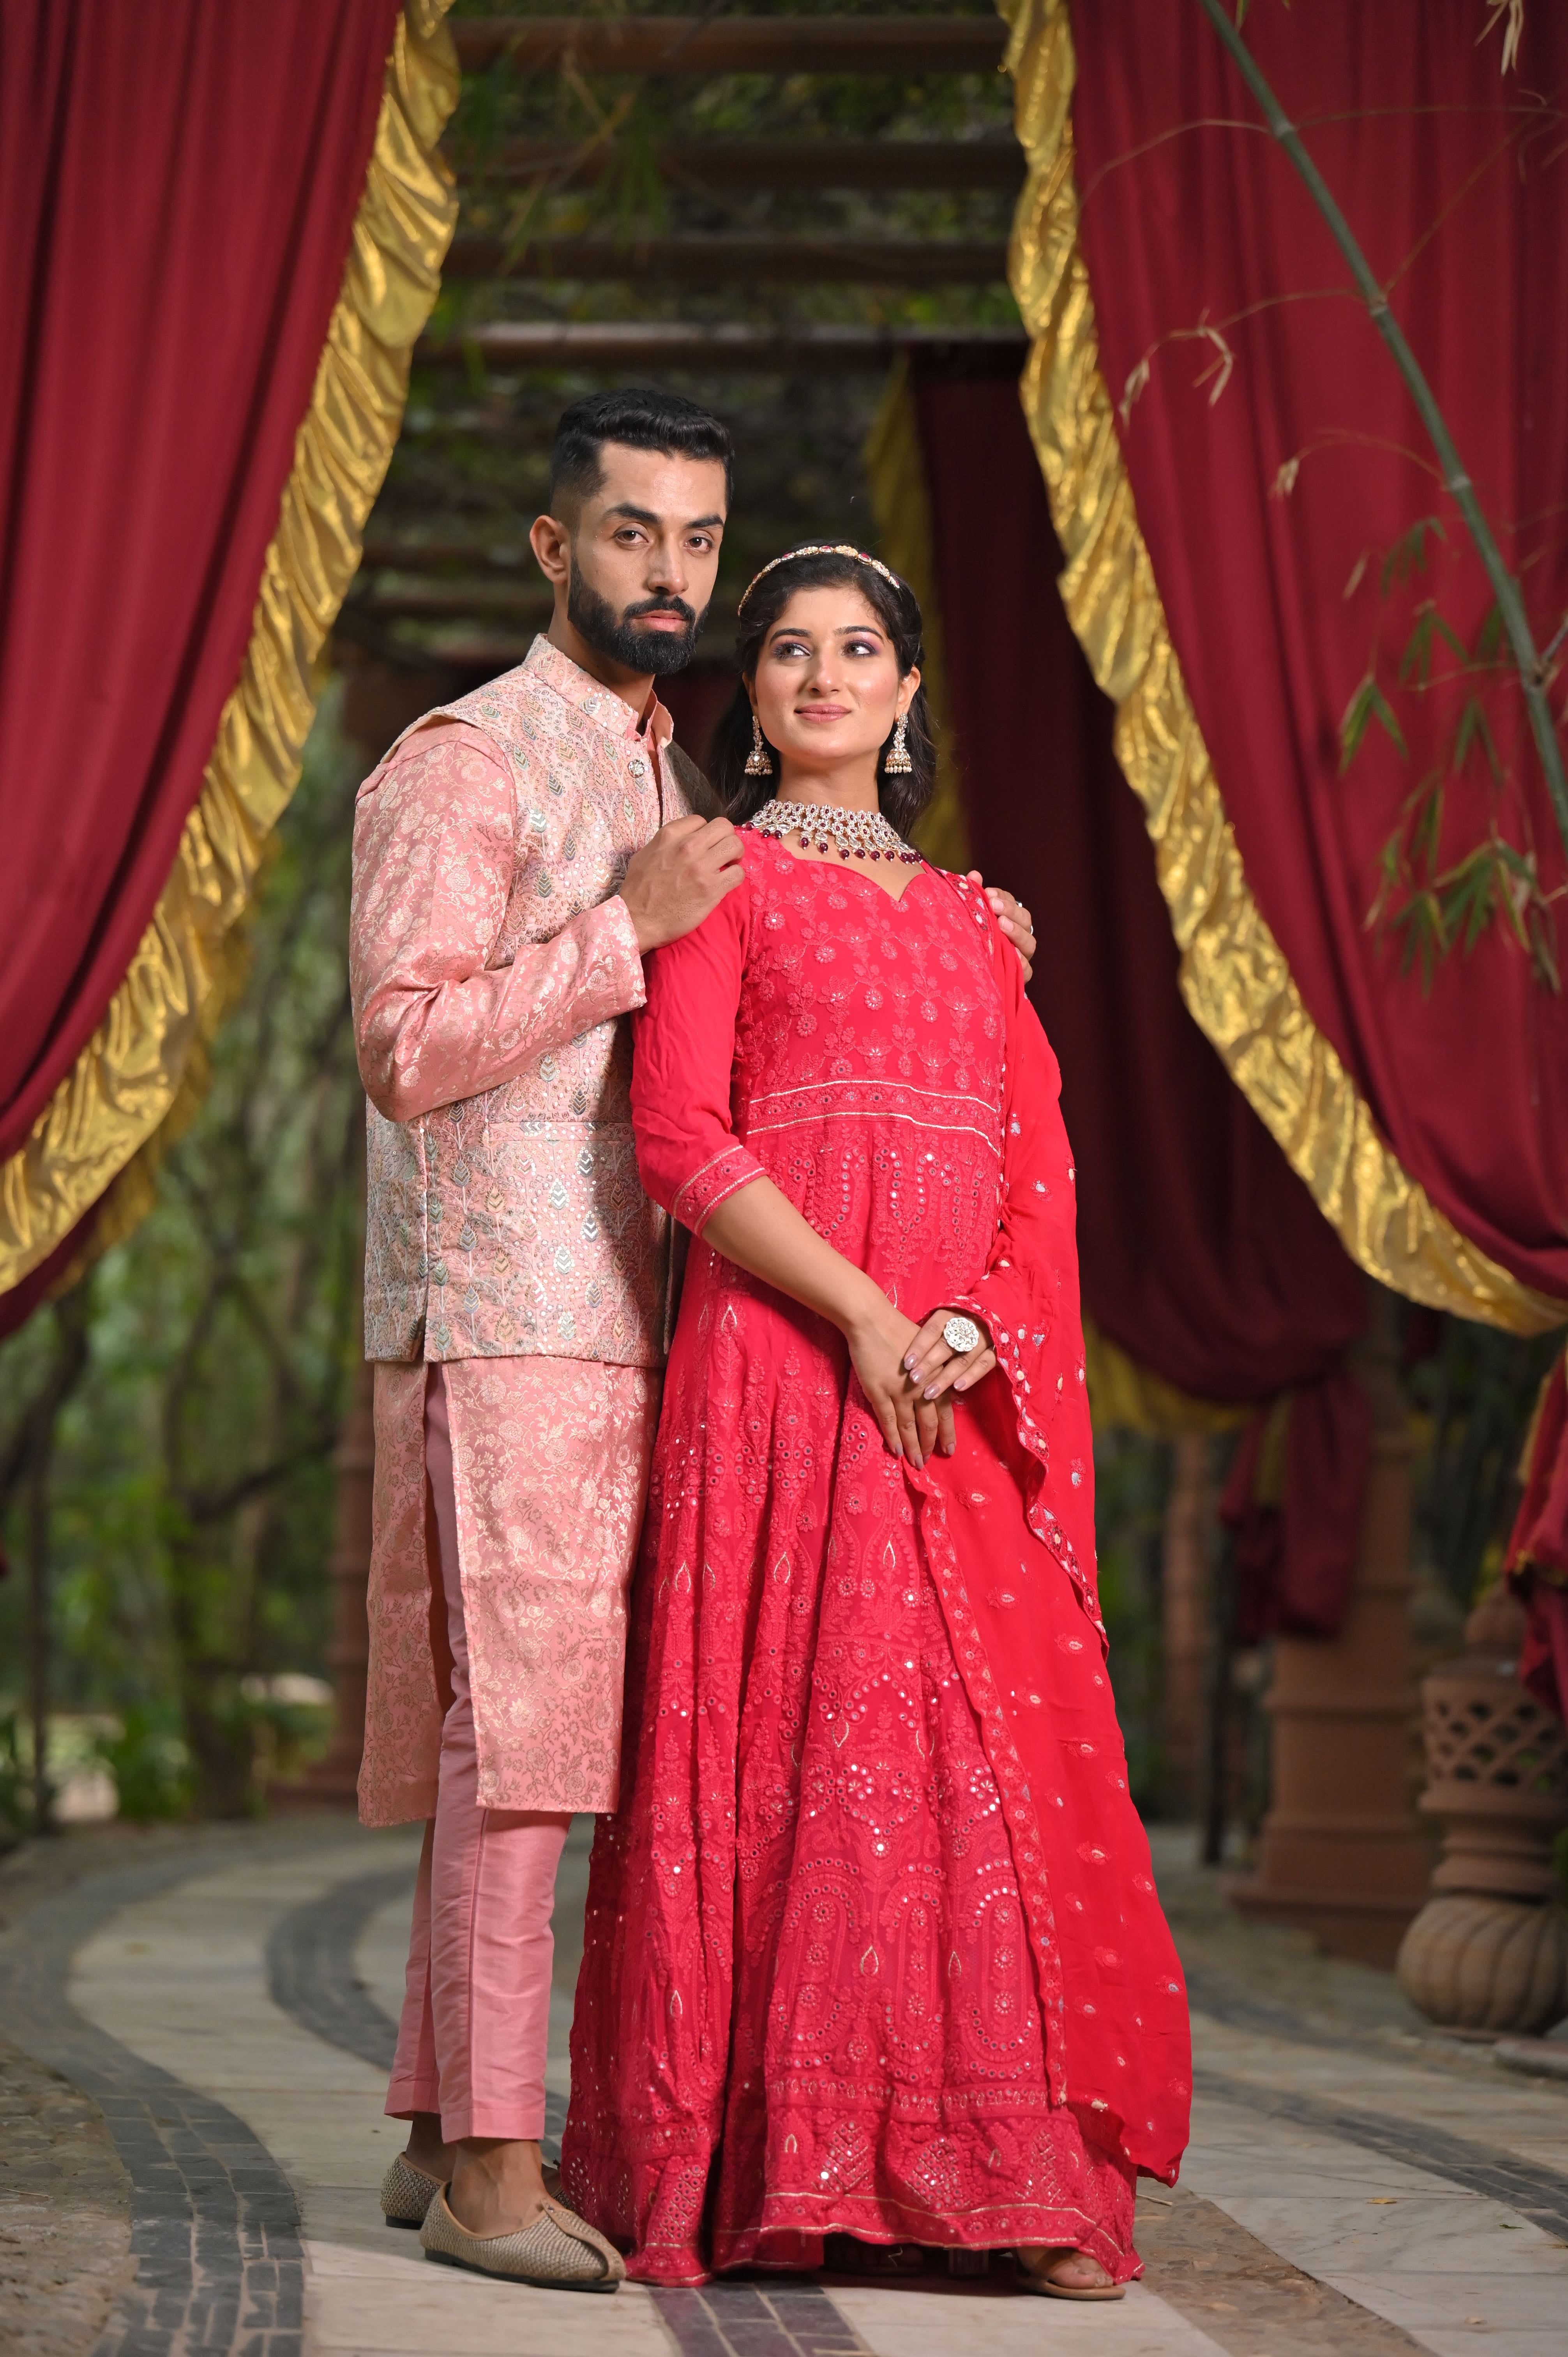 Steal Trends From This Delhi Wedding Of A Kashmiri Bride And A Punjbai  Groom | Couple wedding dress, Engagement dress for bride, Wedding reception  gowns